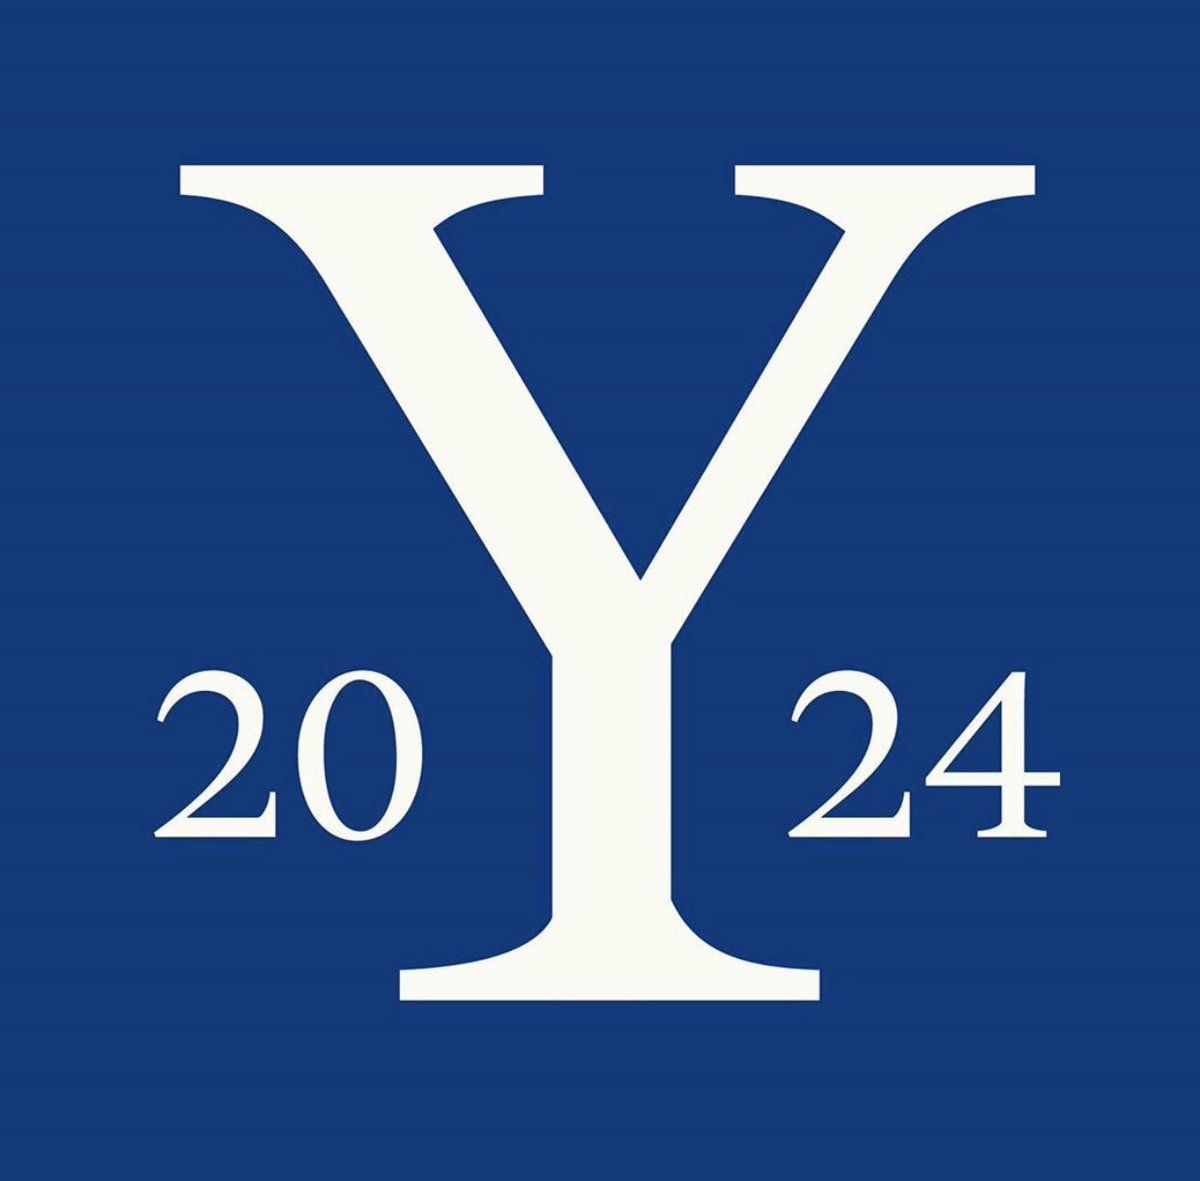 ecstatic to announce my acceptance to the Yale Class of 2024!!! #yale2024